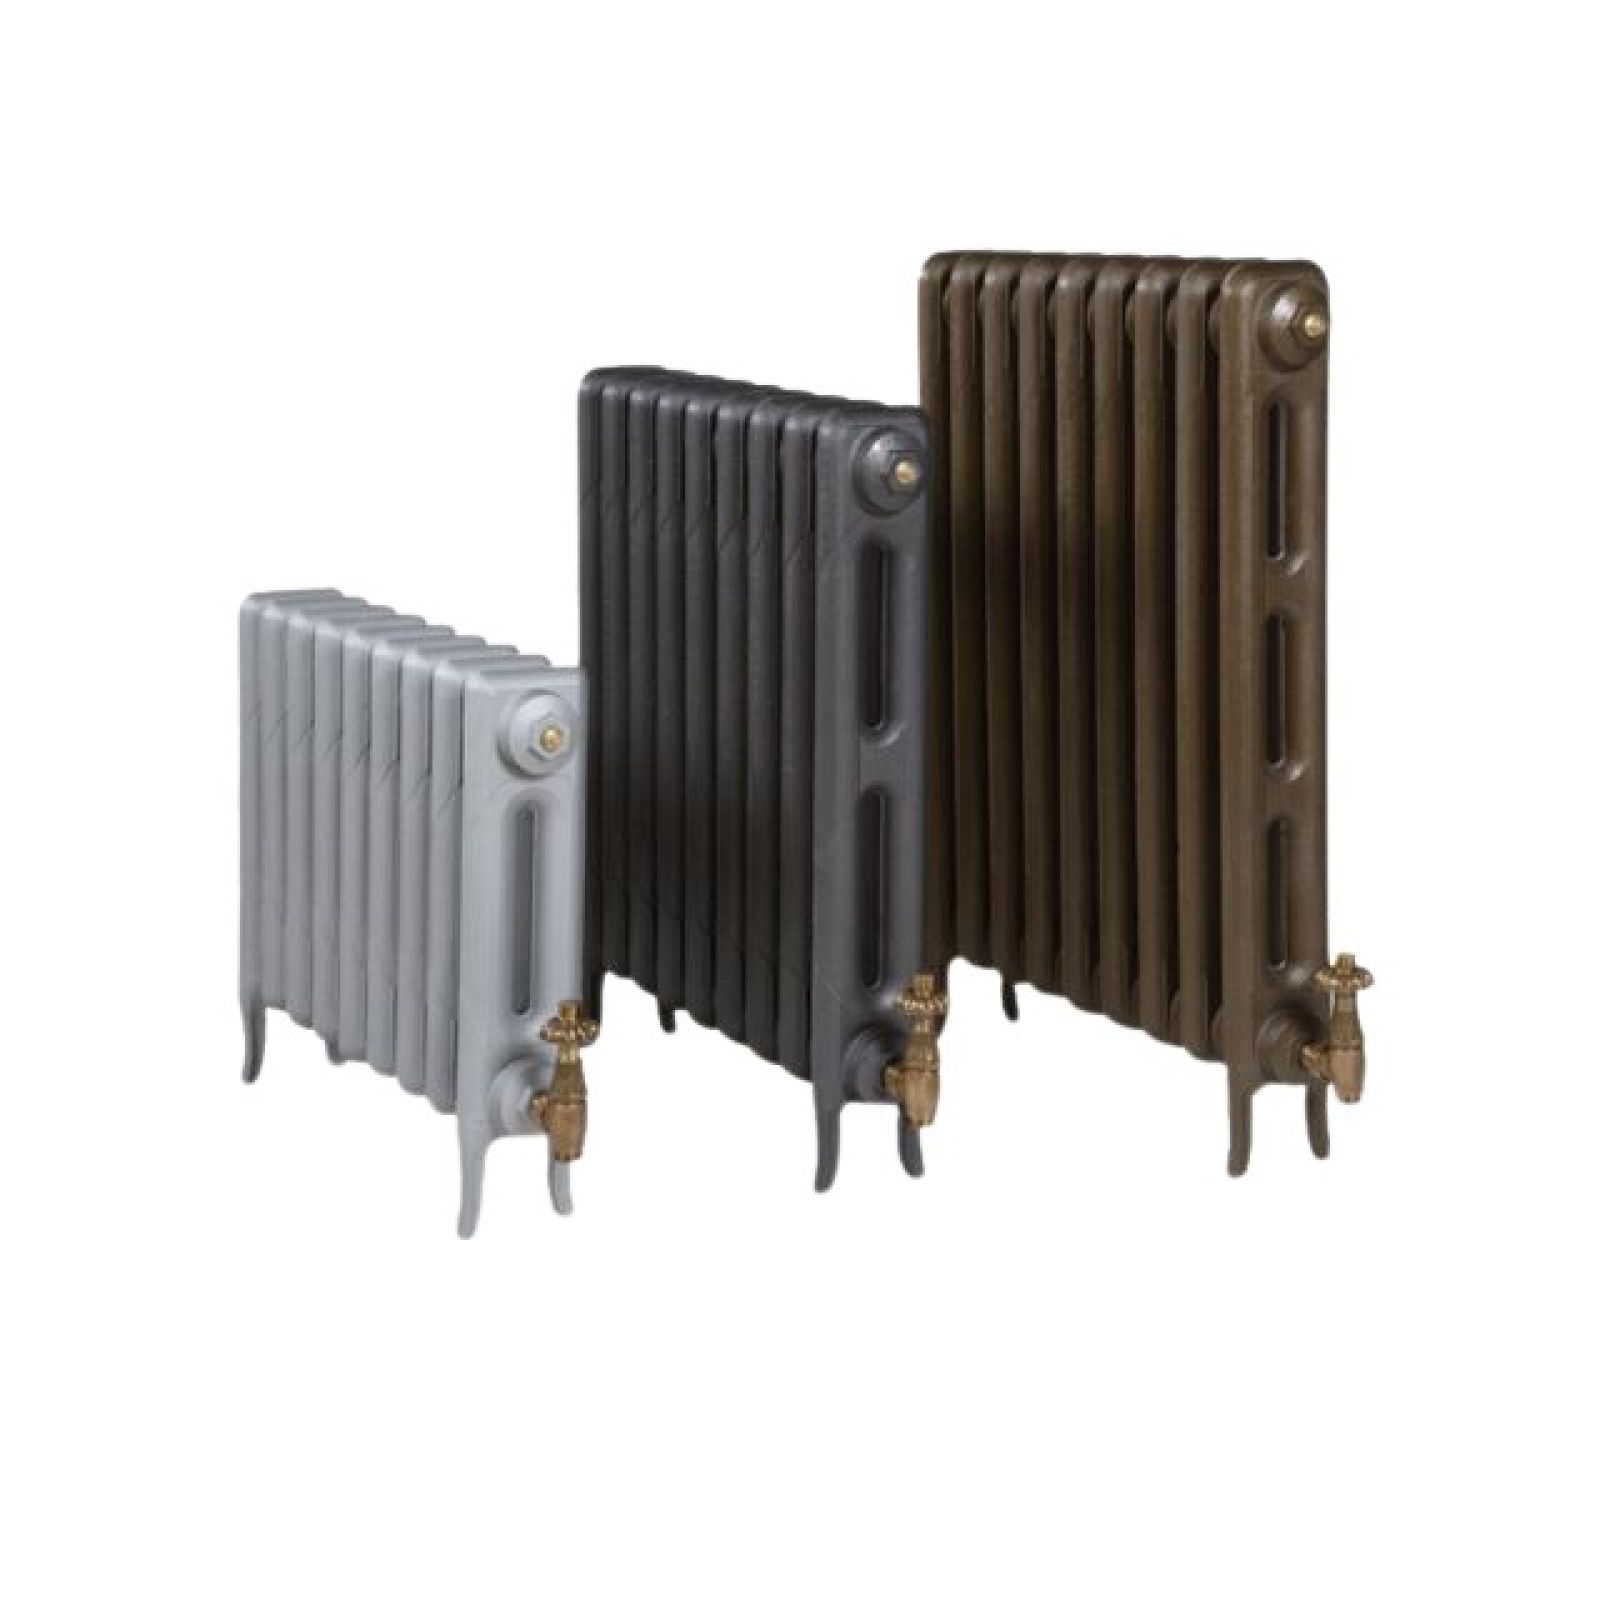 Westminster Electric radiator 460mm high